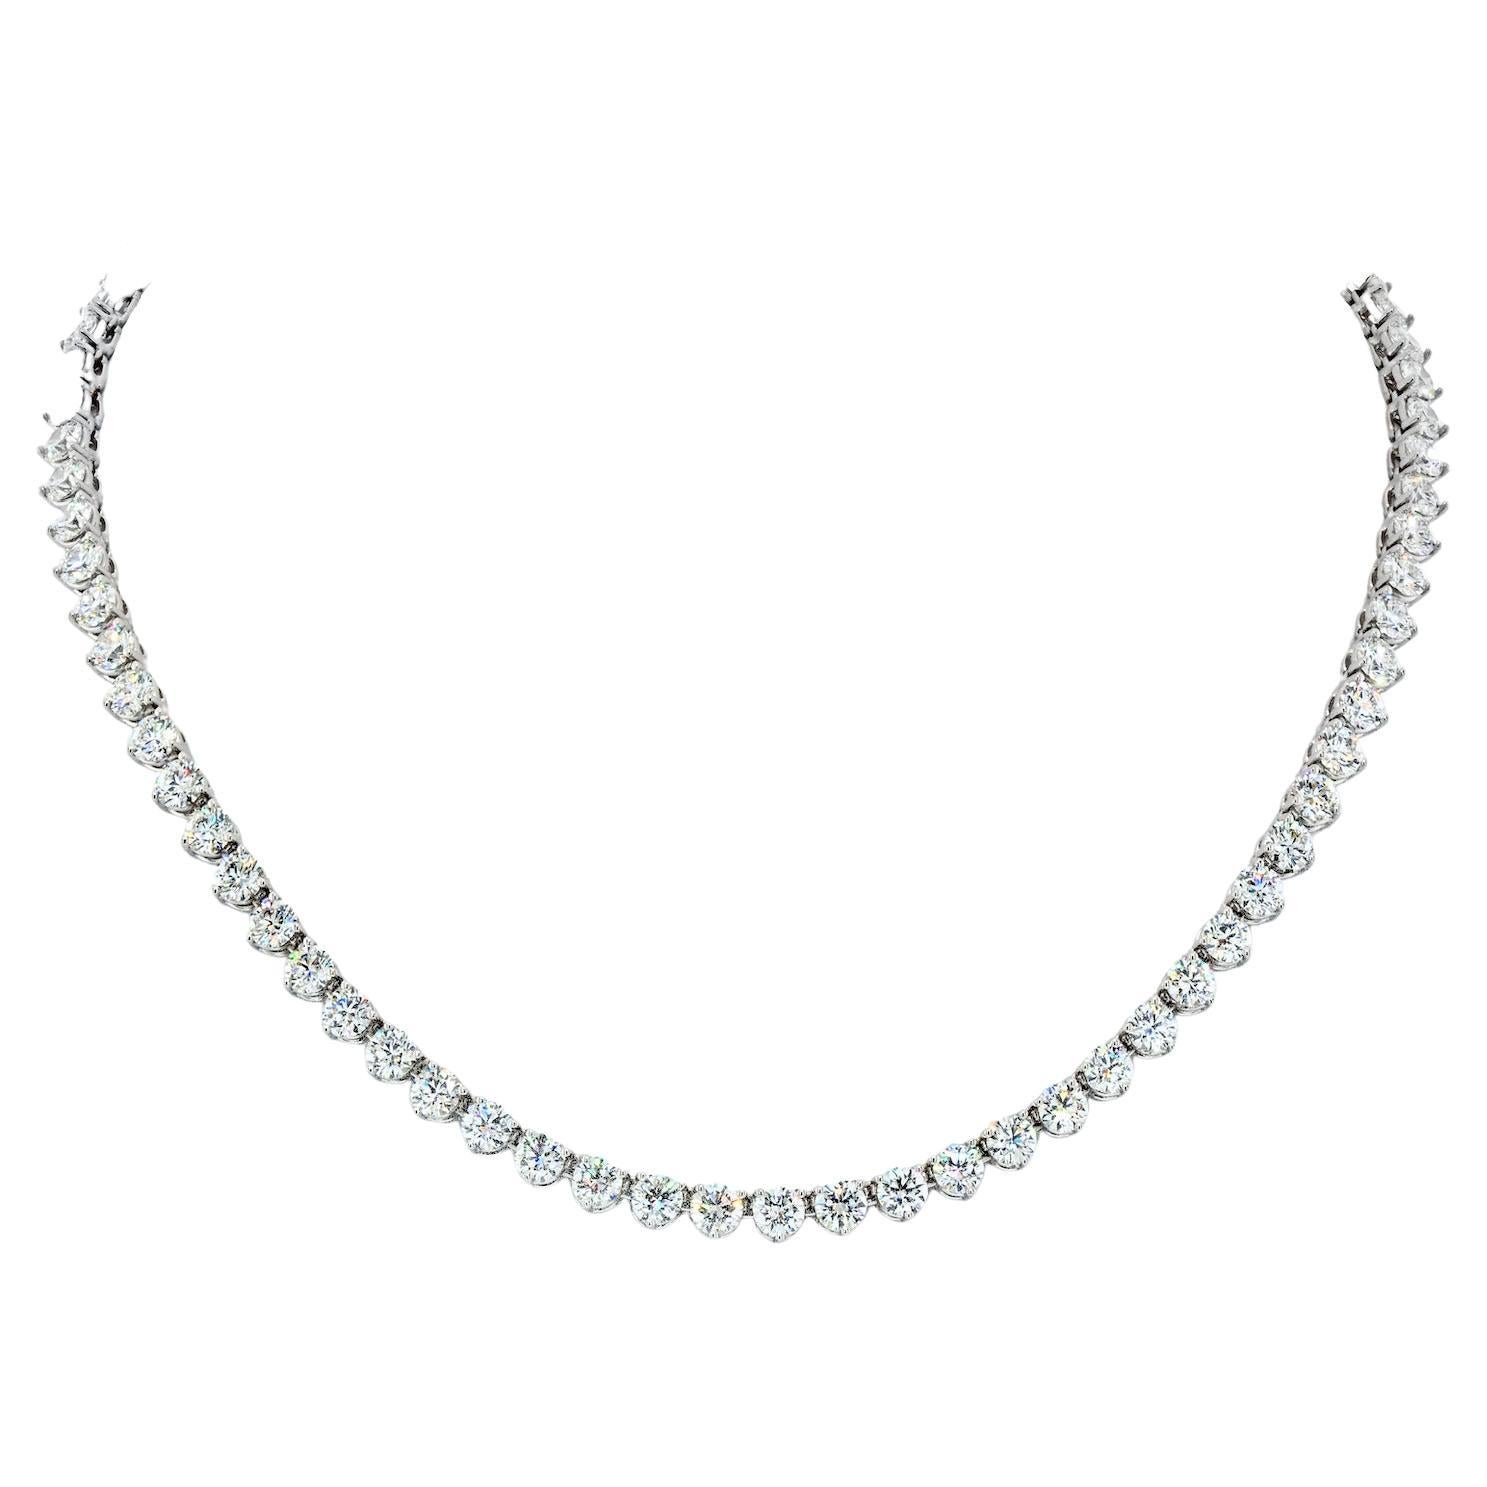 Louis Newman & Co GIA Diamond Straight Line Tennis Necklace with 25.24 Carats